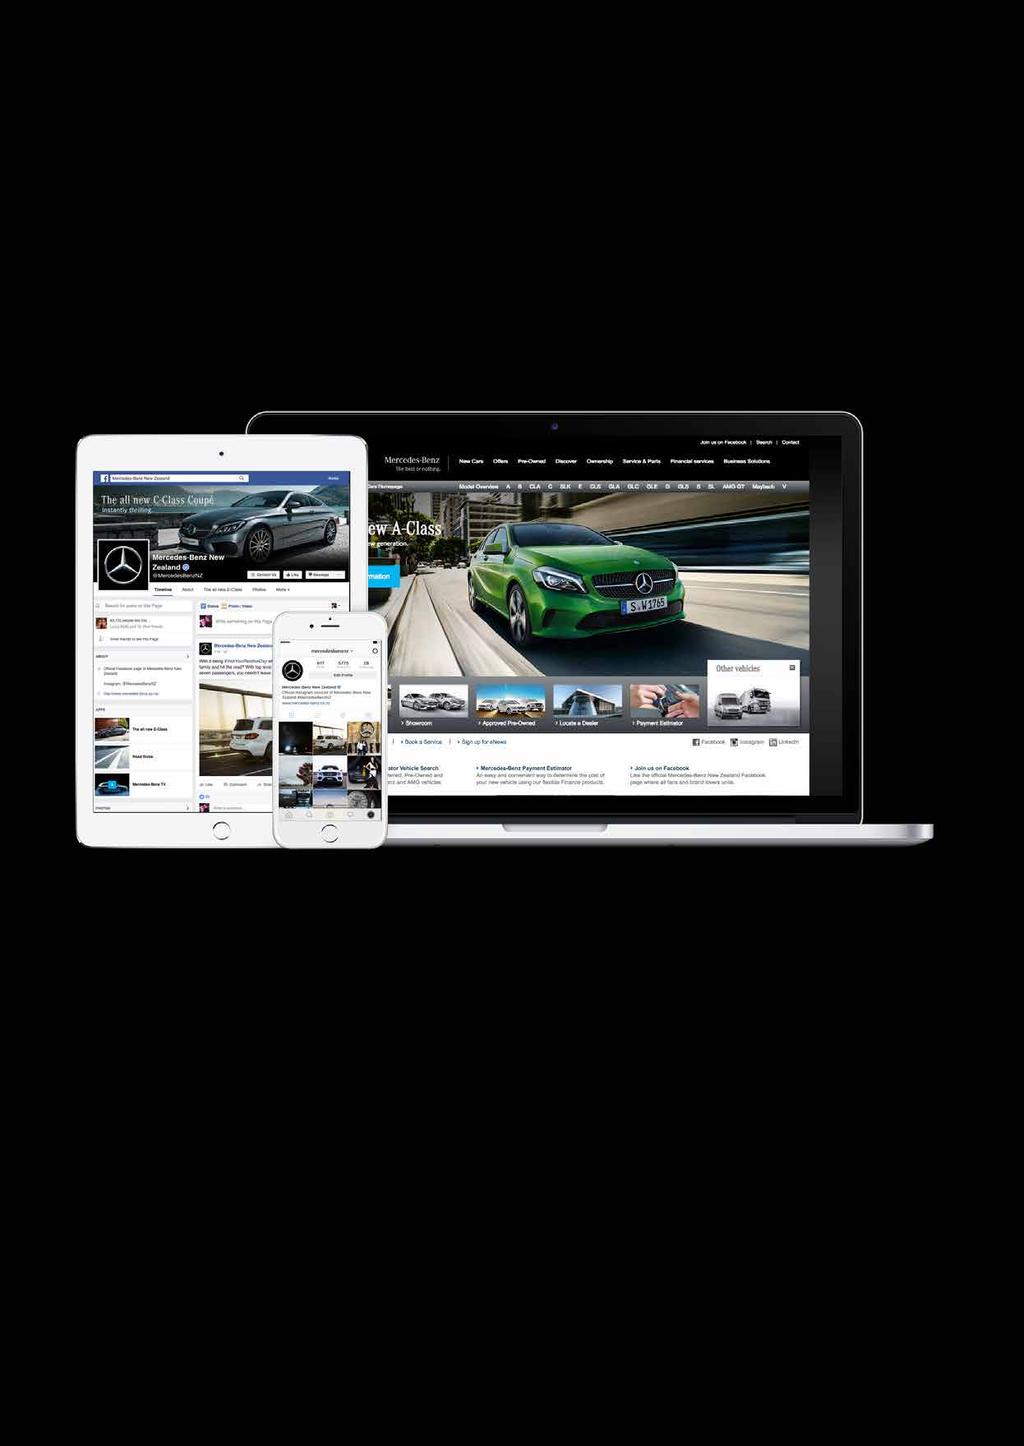 Stay up to date with Mercedes-Benz New Zealand. www.mercedes-benz.co.